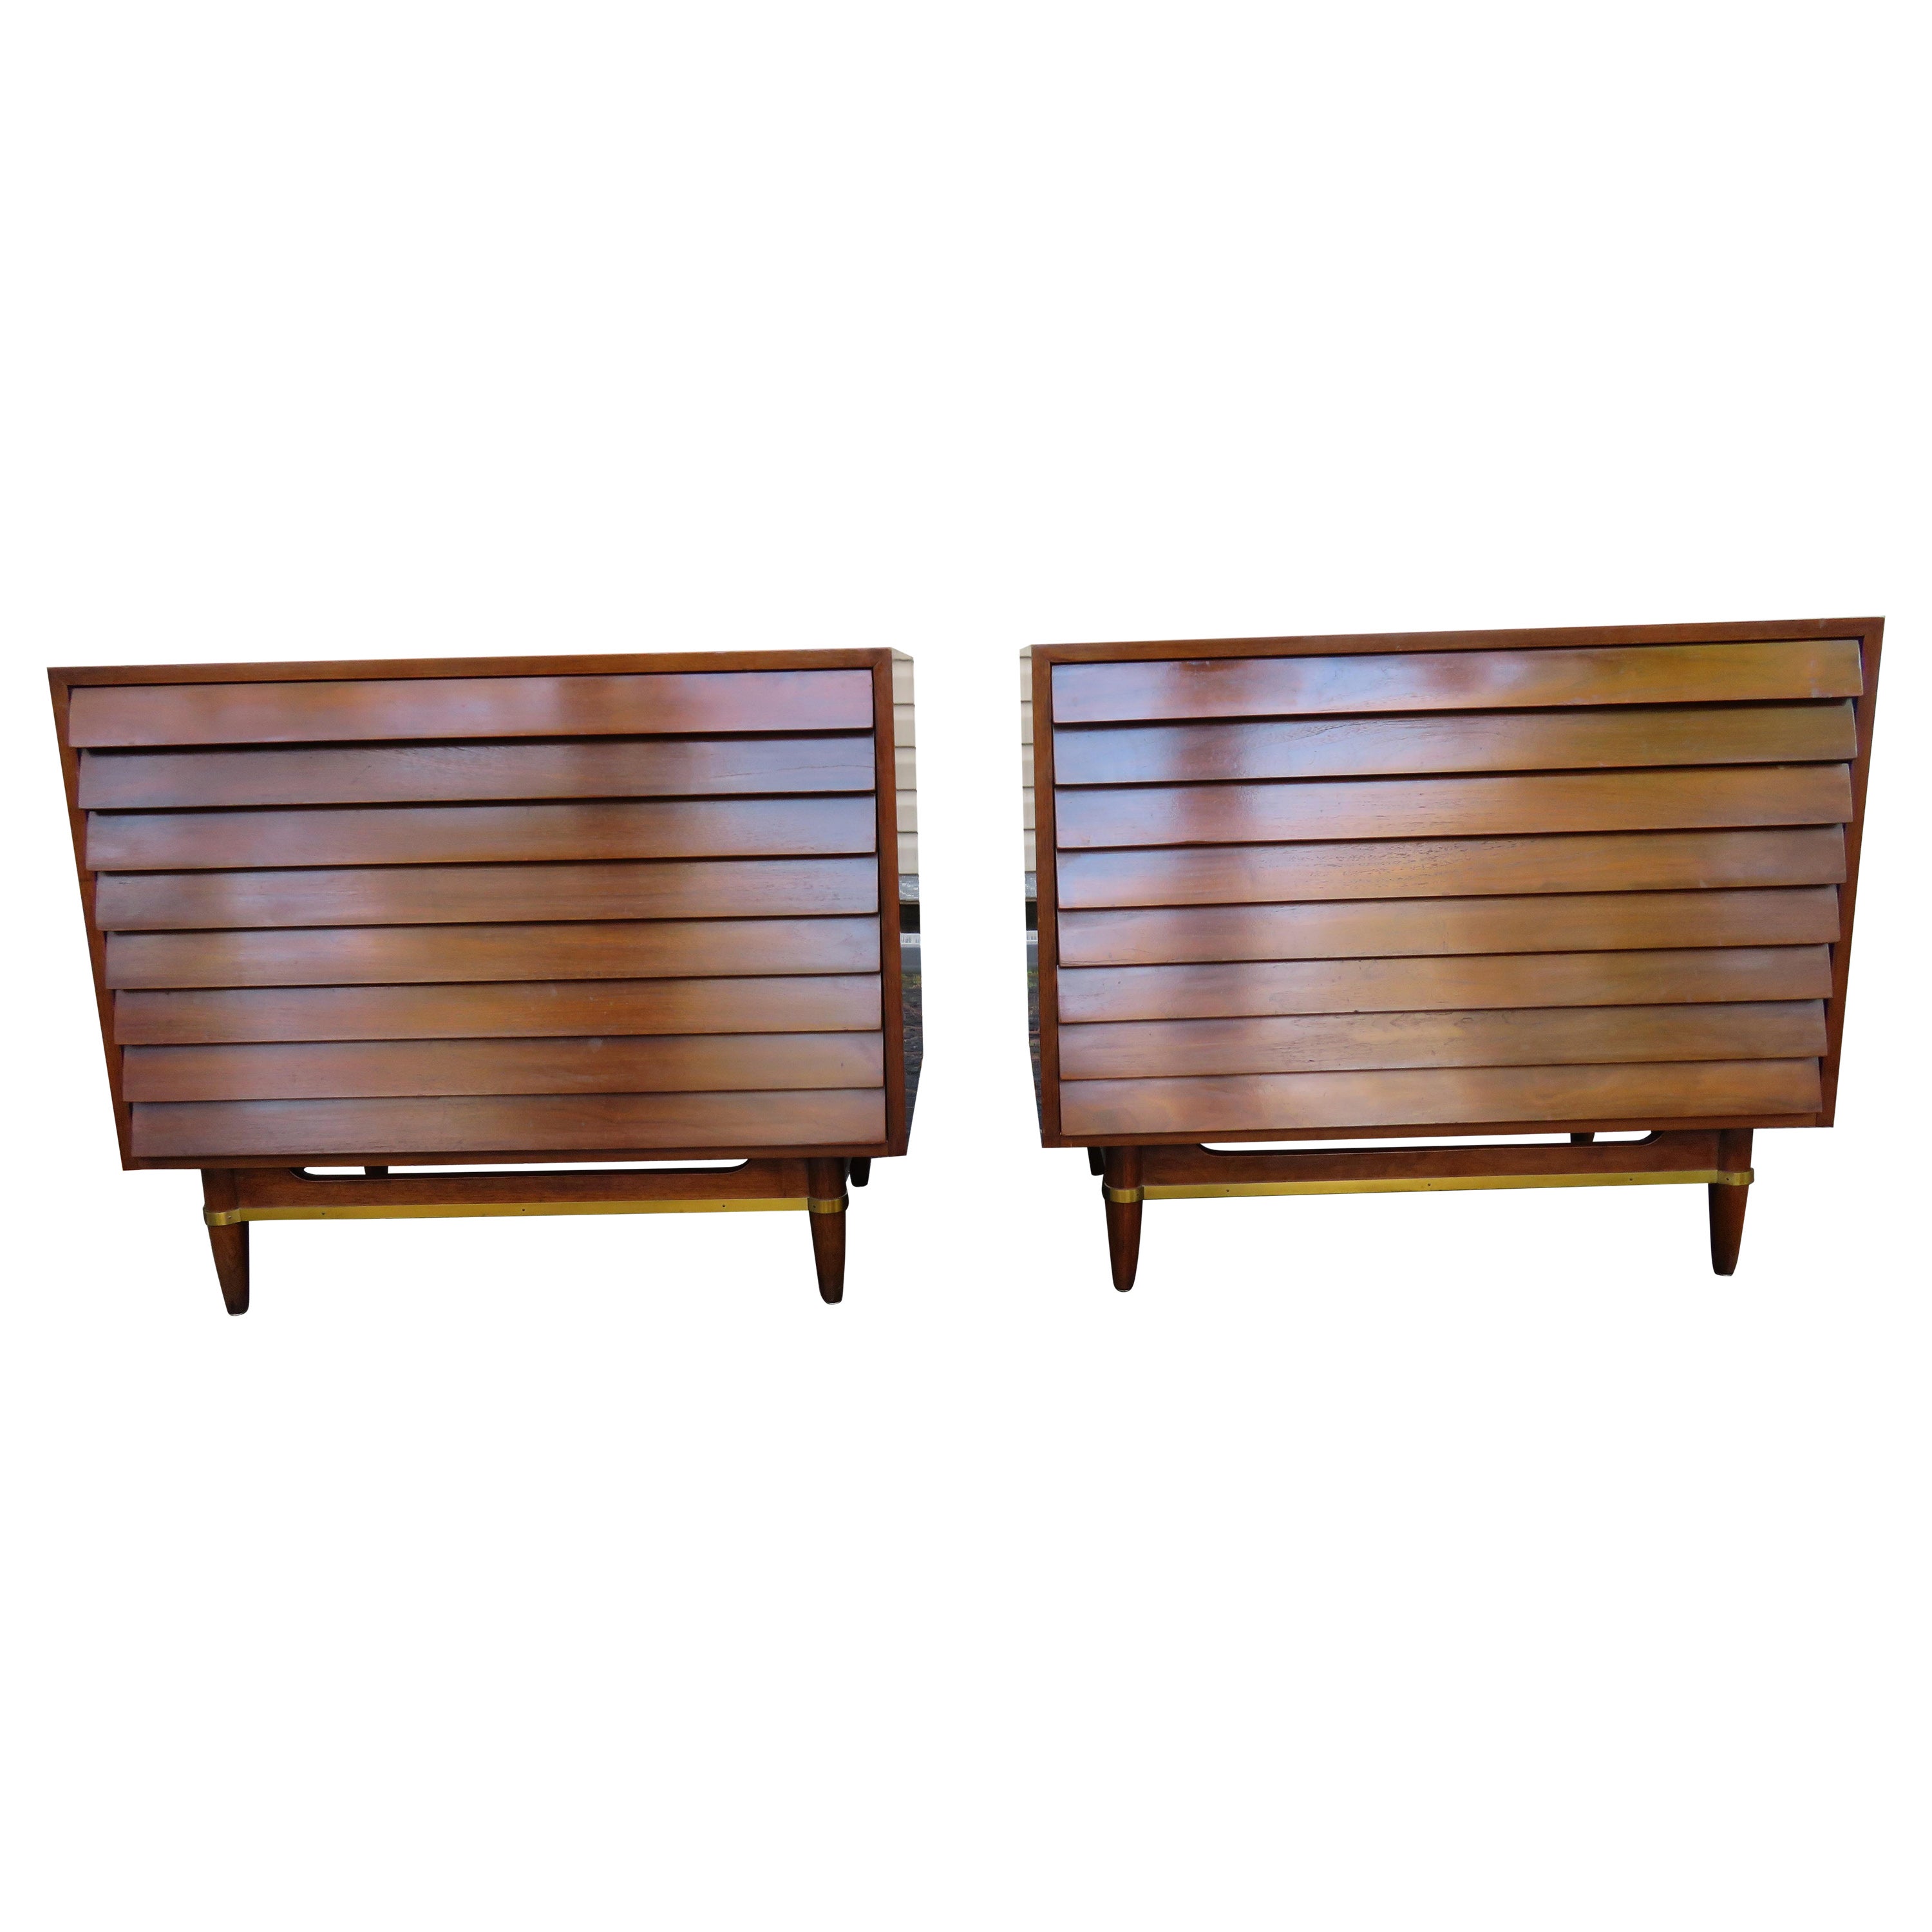 Handsome Pair of American of Martinsville Walnut Brass Louvered Bachelors Chests For Sale